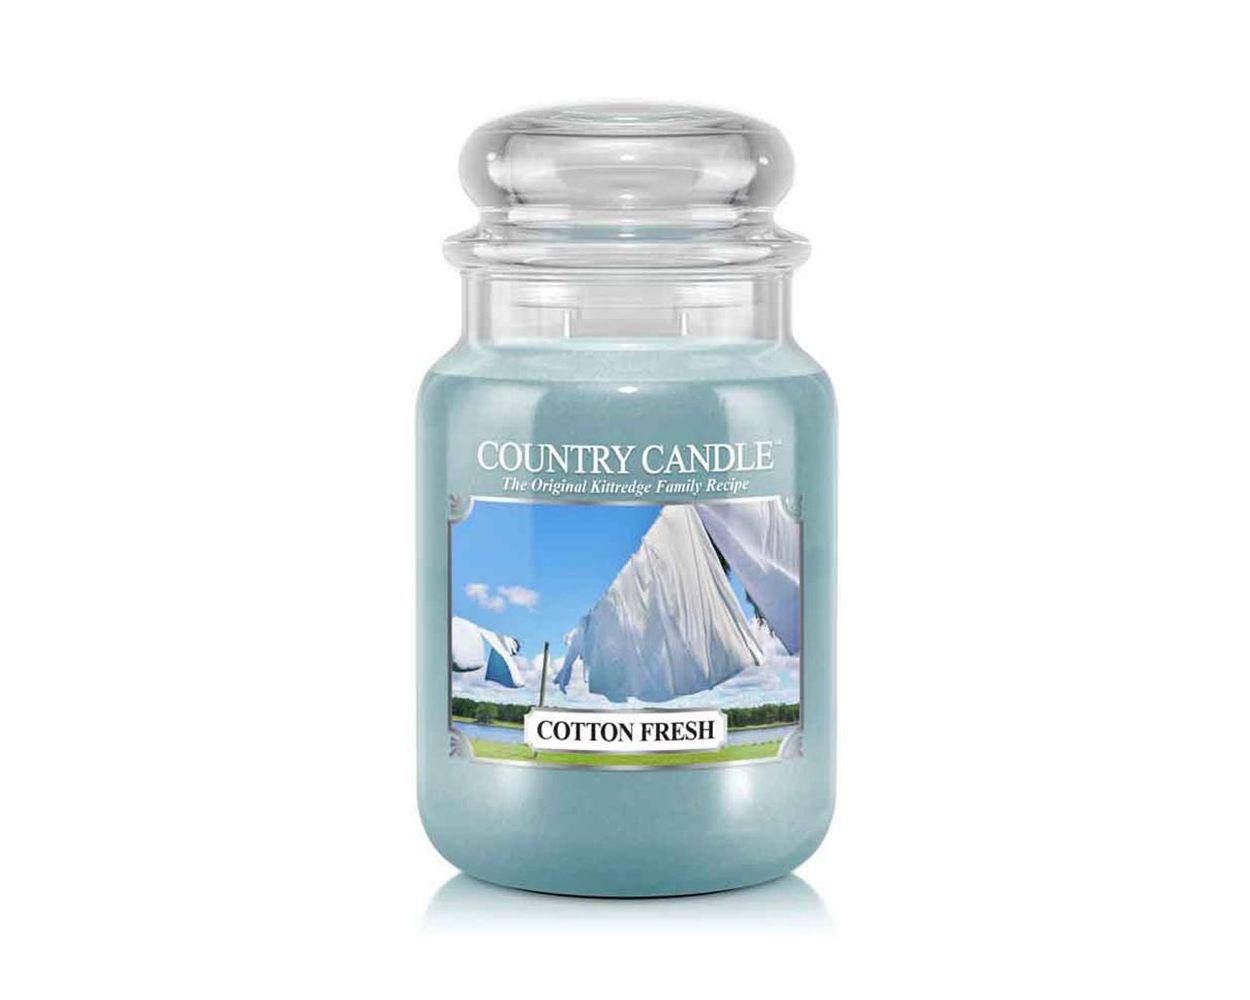 Cotton Fresh scented candle from Country Candle